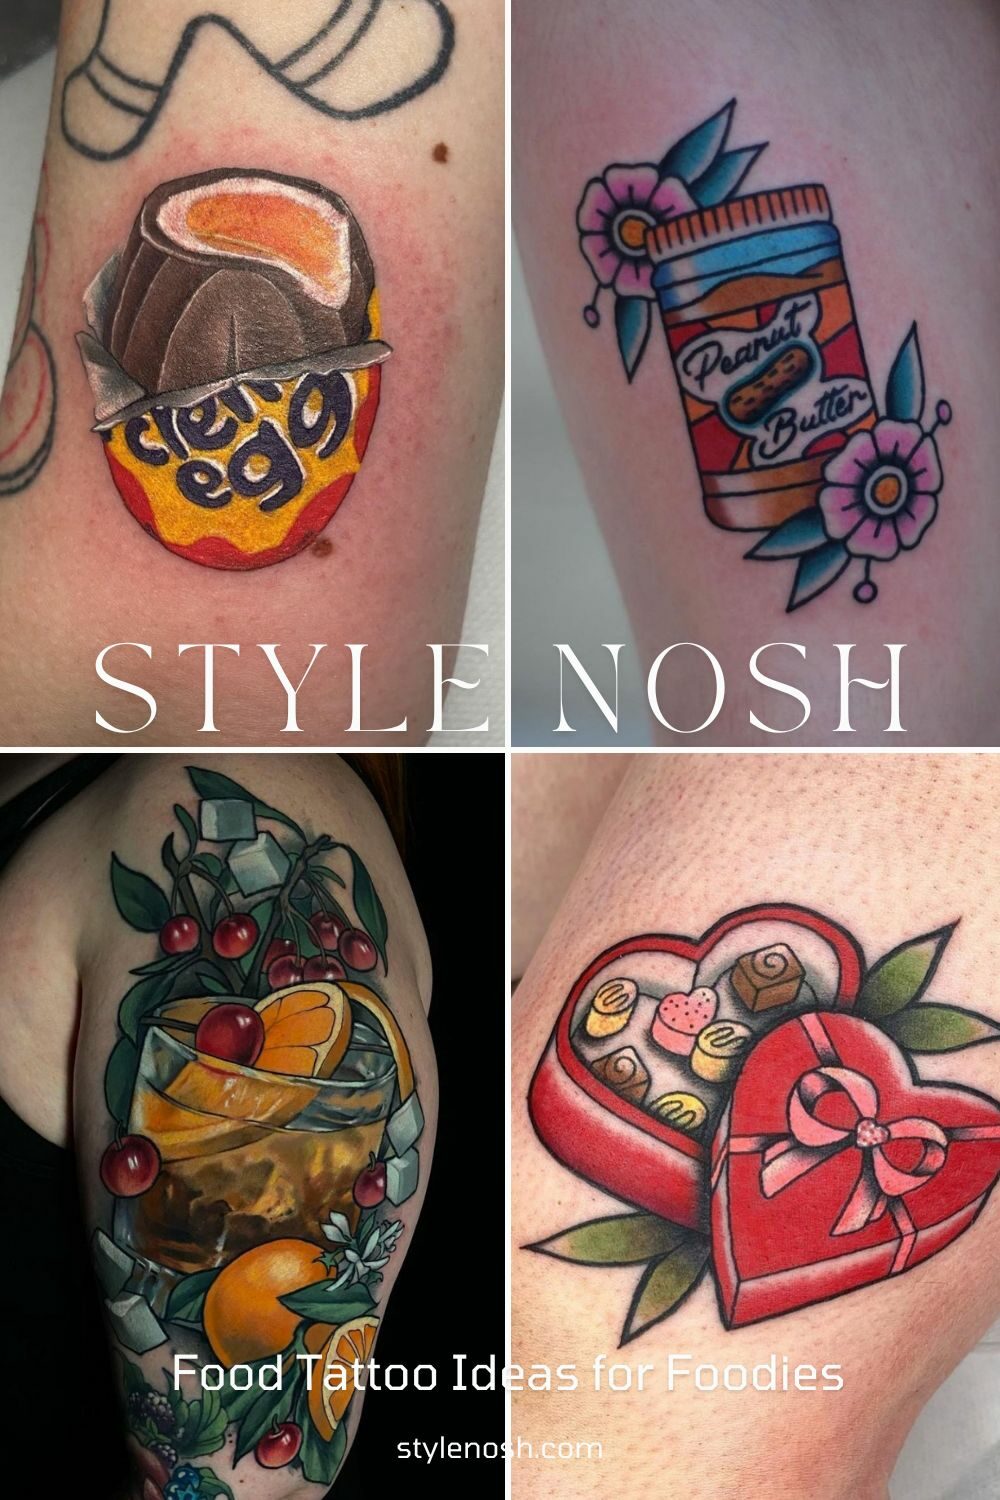 If youre a foodie you might find some inspiration in these tattoo designs